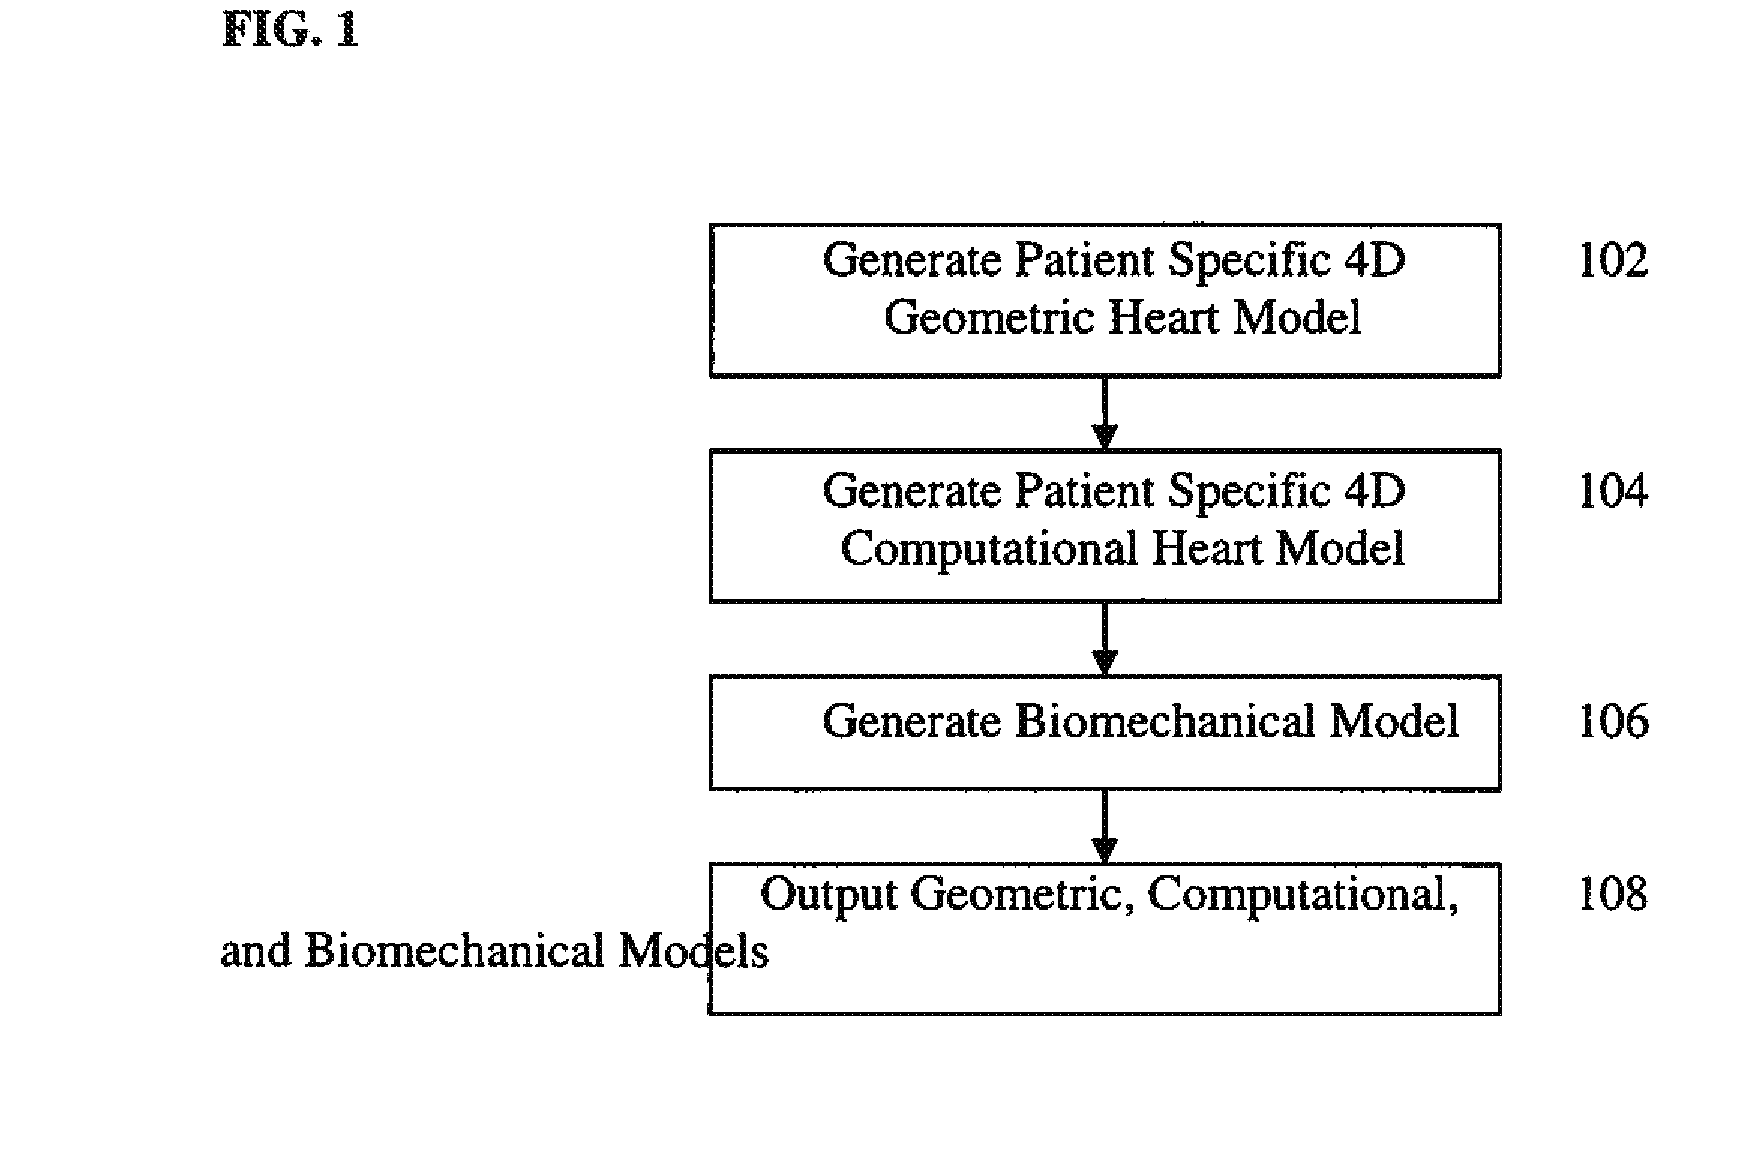 Method and System for Generating a Personalized Anatomical Heart Model